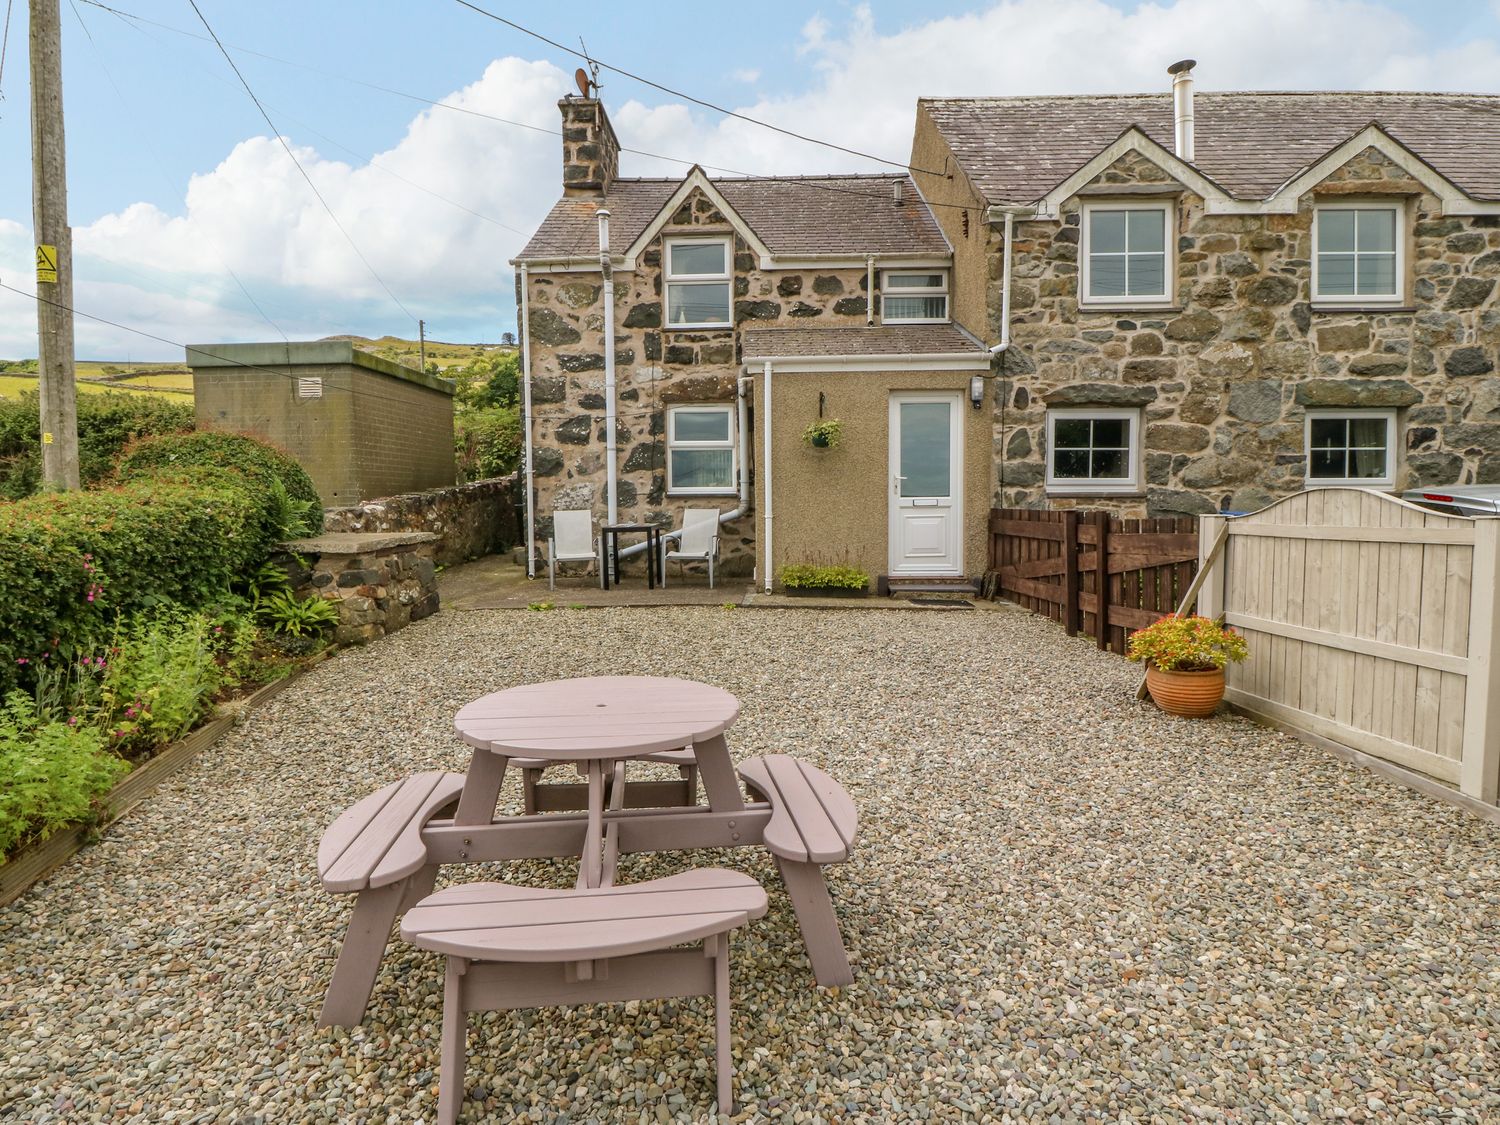 Moonlight Cottage - North Wales - 1107565 - photo 1